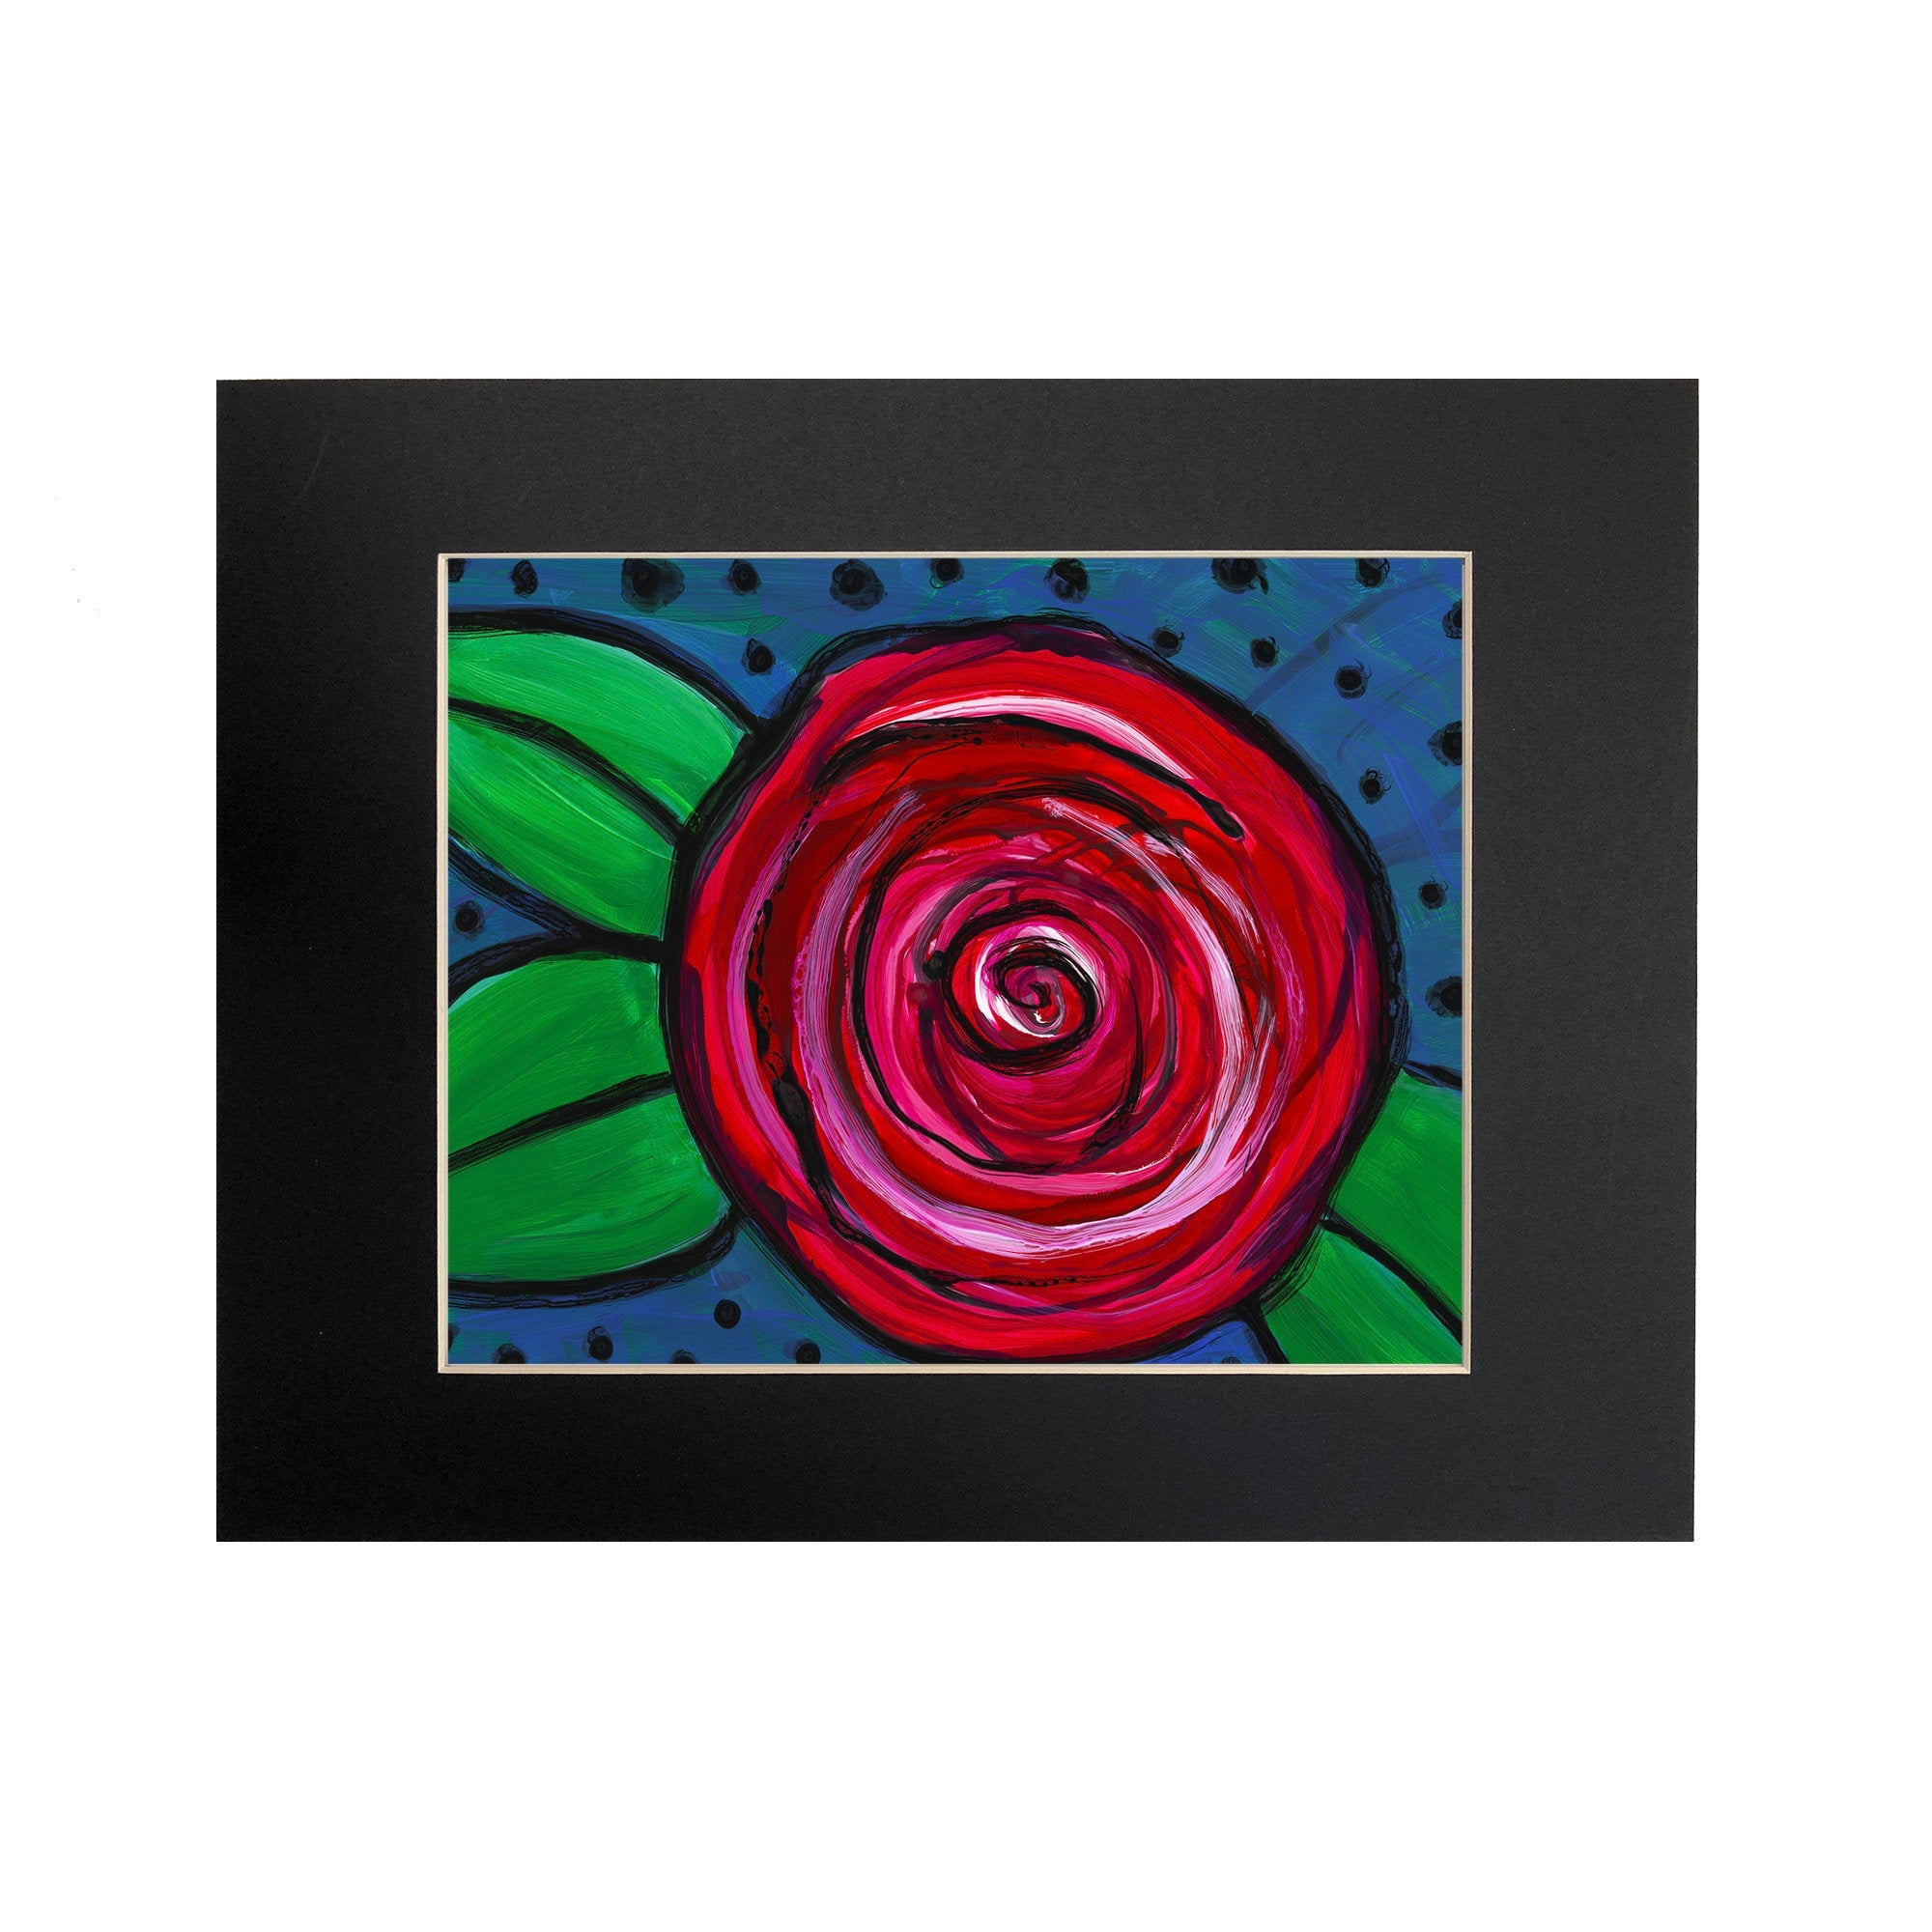 Red Rose Art Print - 8 x 10 inch with optional black mat - Colorful Floral Print by Claudine Intner